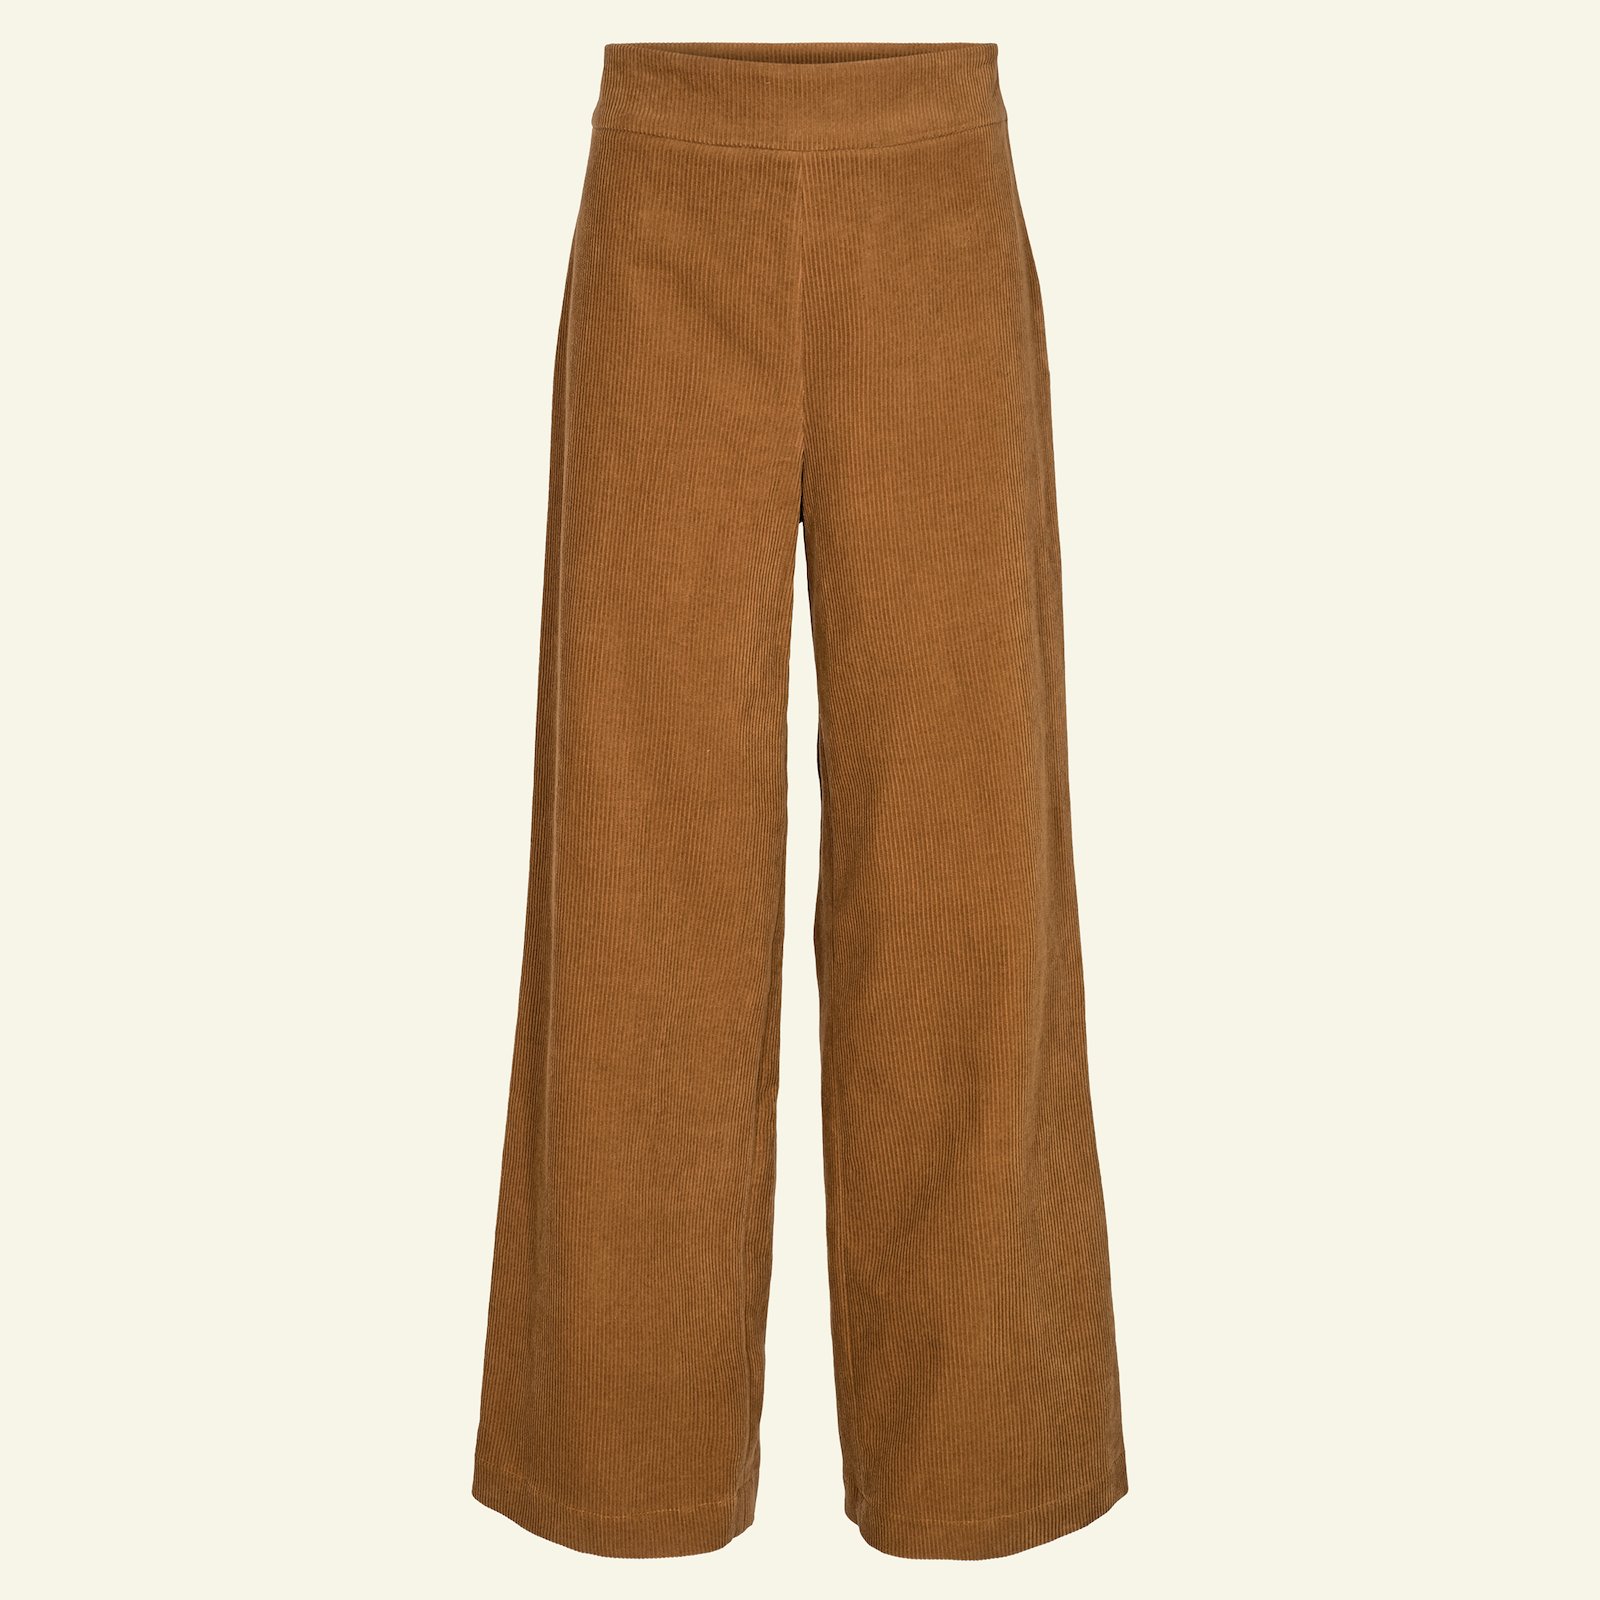 Highwaist and wide legs trousers, 34/6 p20052_430810_sskit